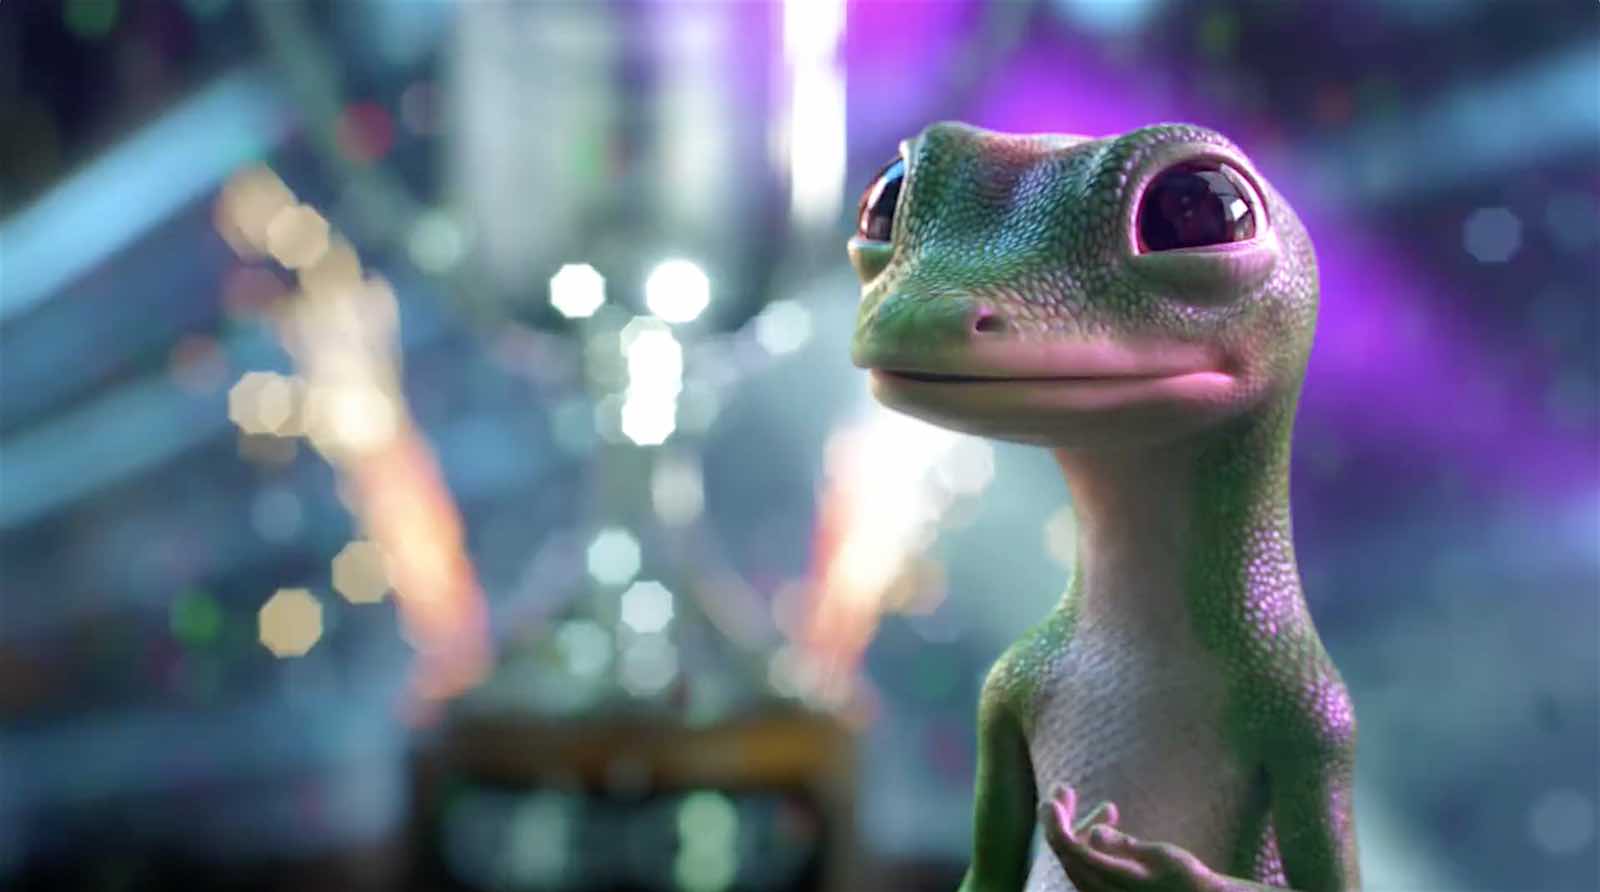 How to Make a Commercial People Won’t Skip Through - Geico Gecko